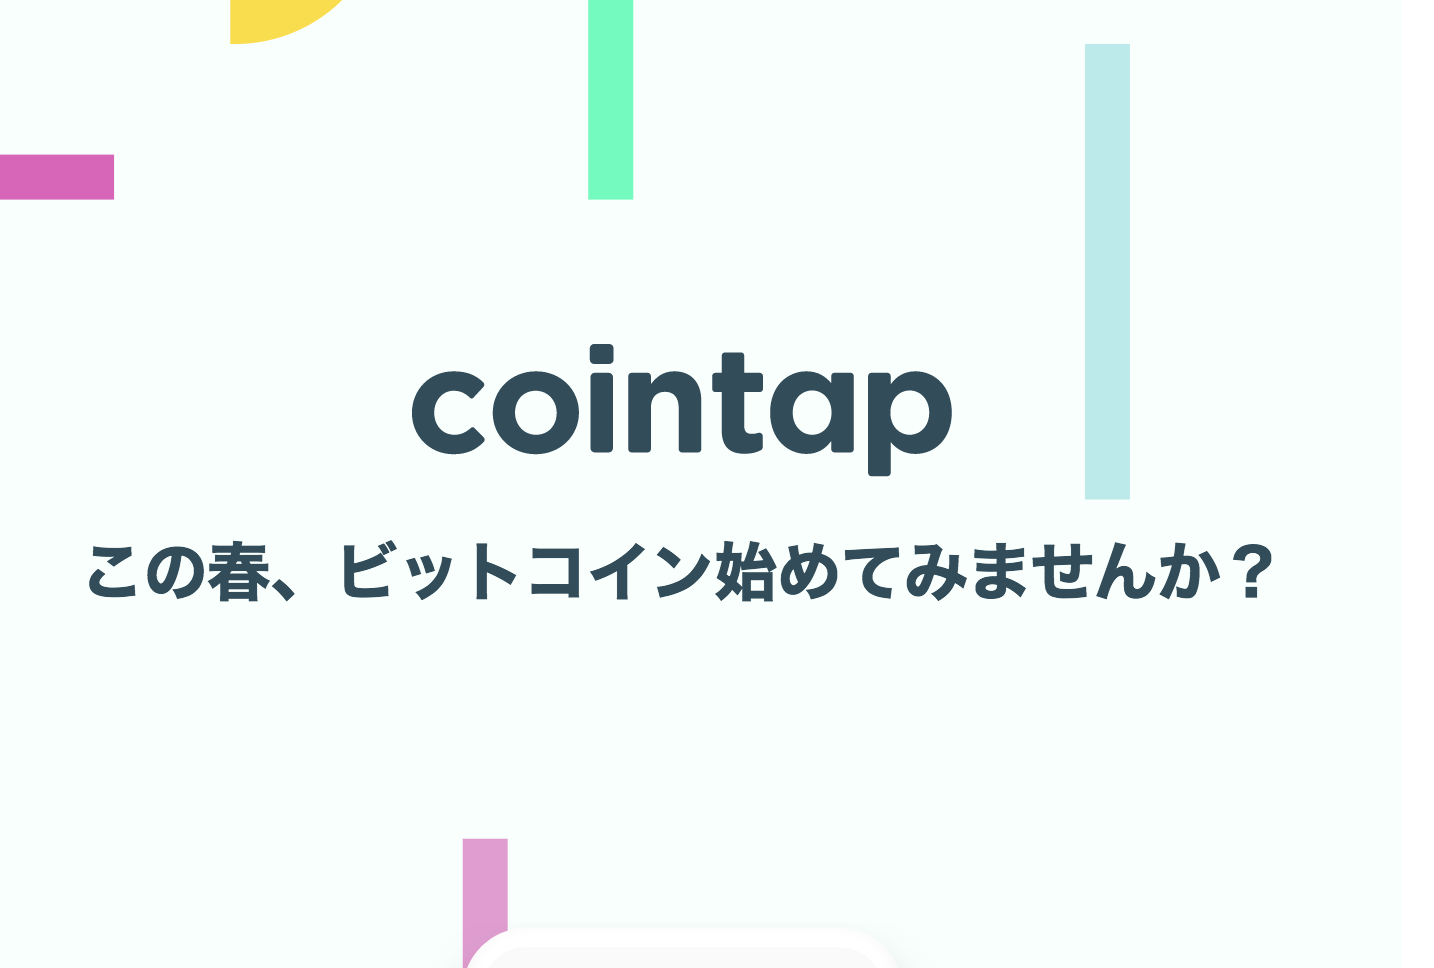 cointap（コインタップ/DMM）の評判、口コミ、メリット、デメリットを徹底調査！